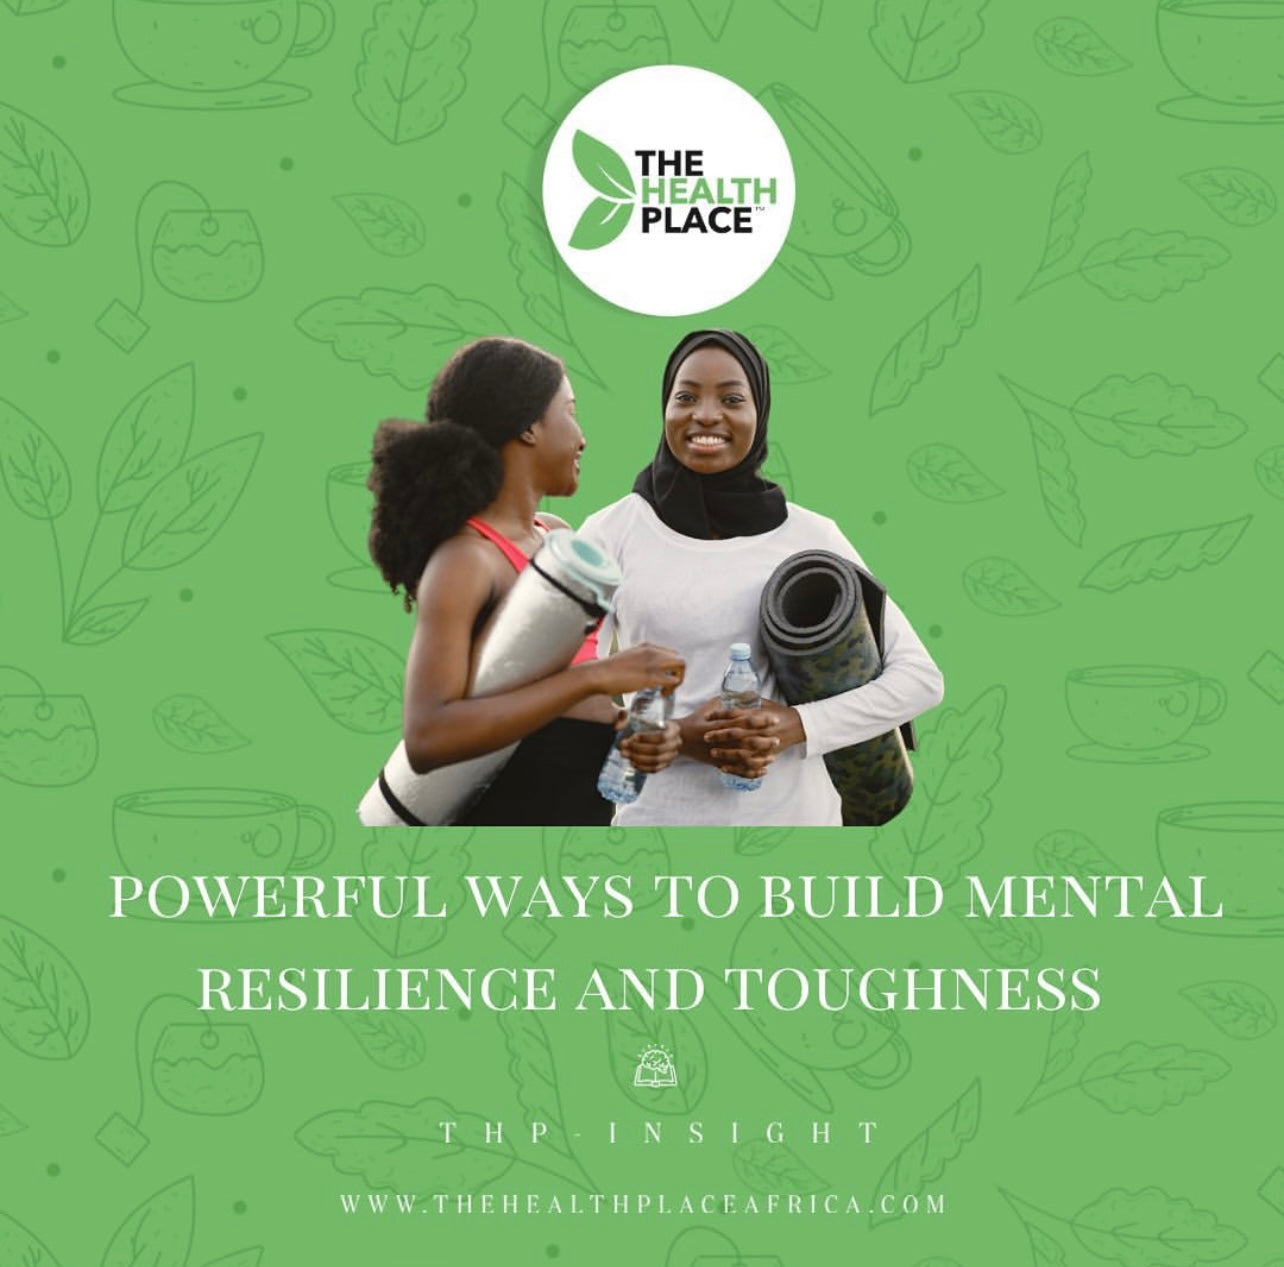 POWERFUL WAYS TO BUILD MENTAL RESILIENCE AND TOUGHNESS